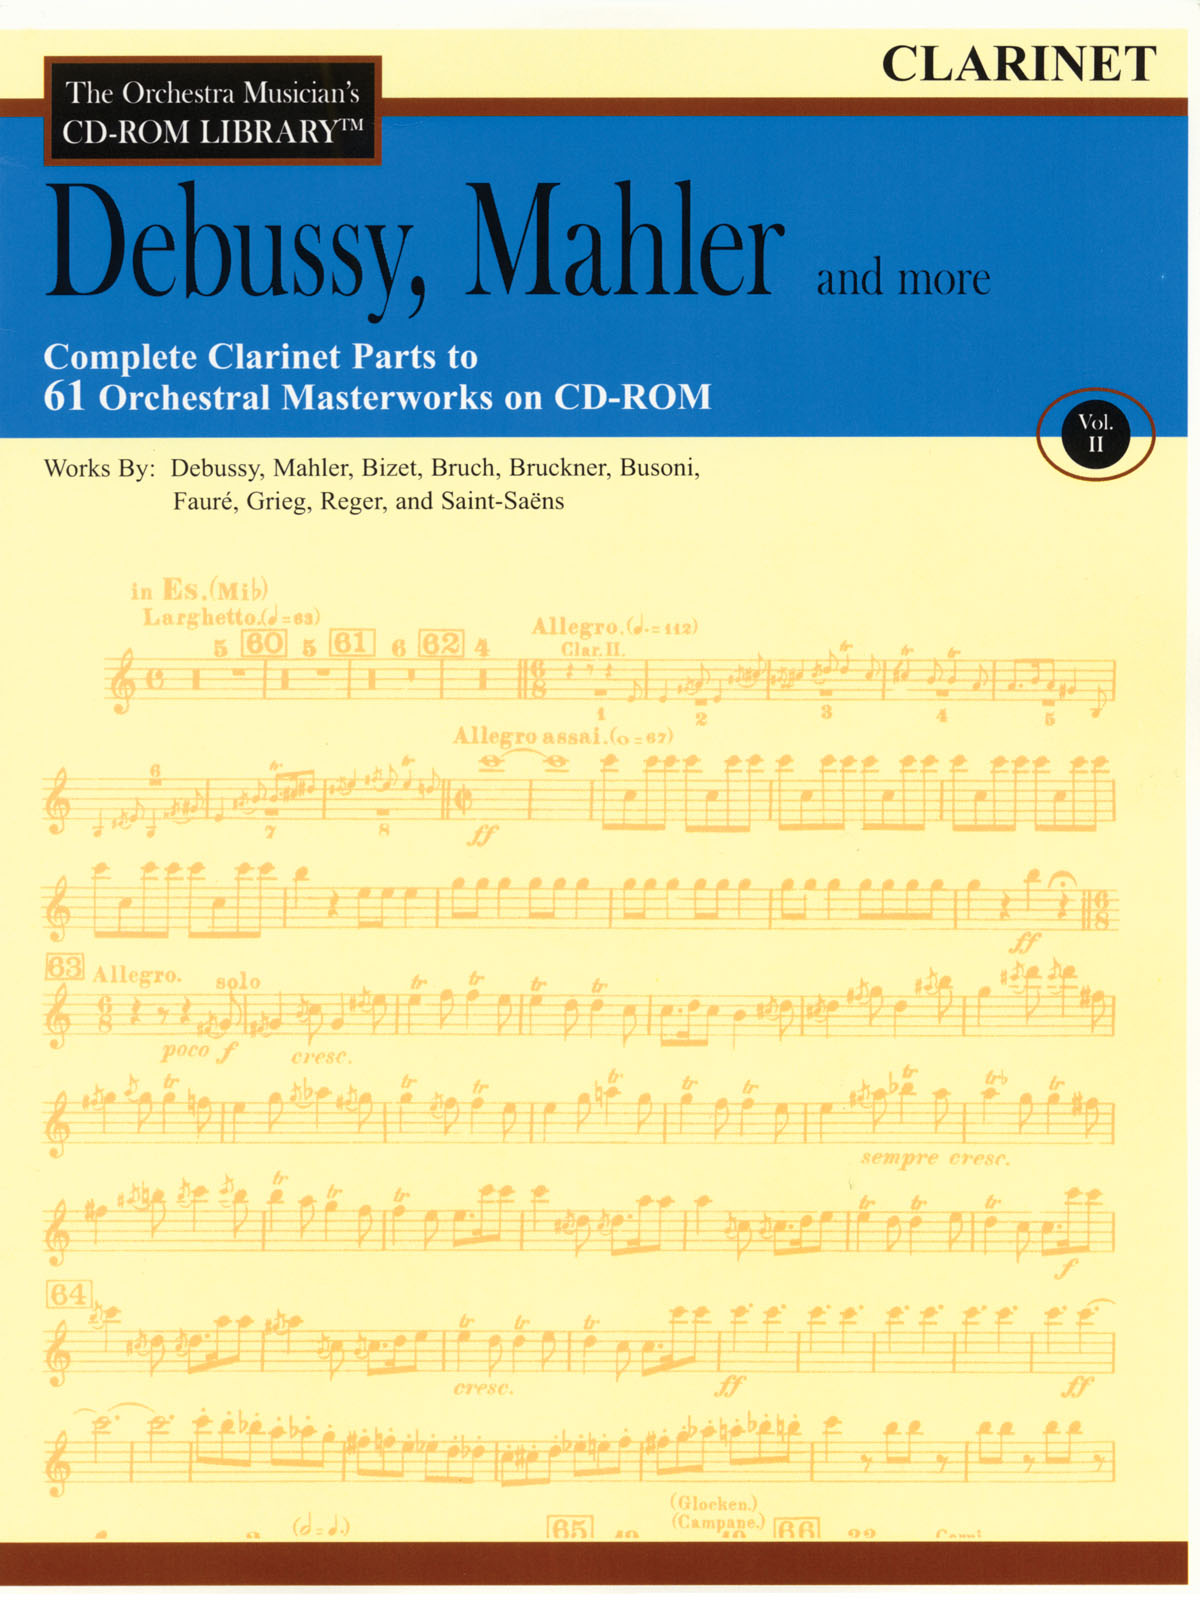 Debussy, Mahler and More - Volume 2(The Orchestra Musician's CD-ROM Library - Clarinet)